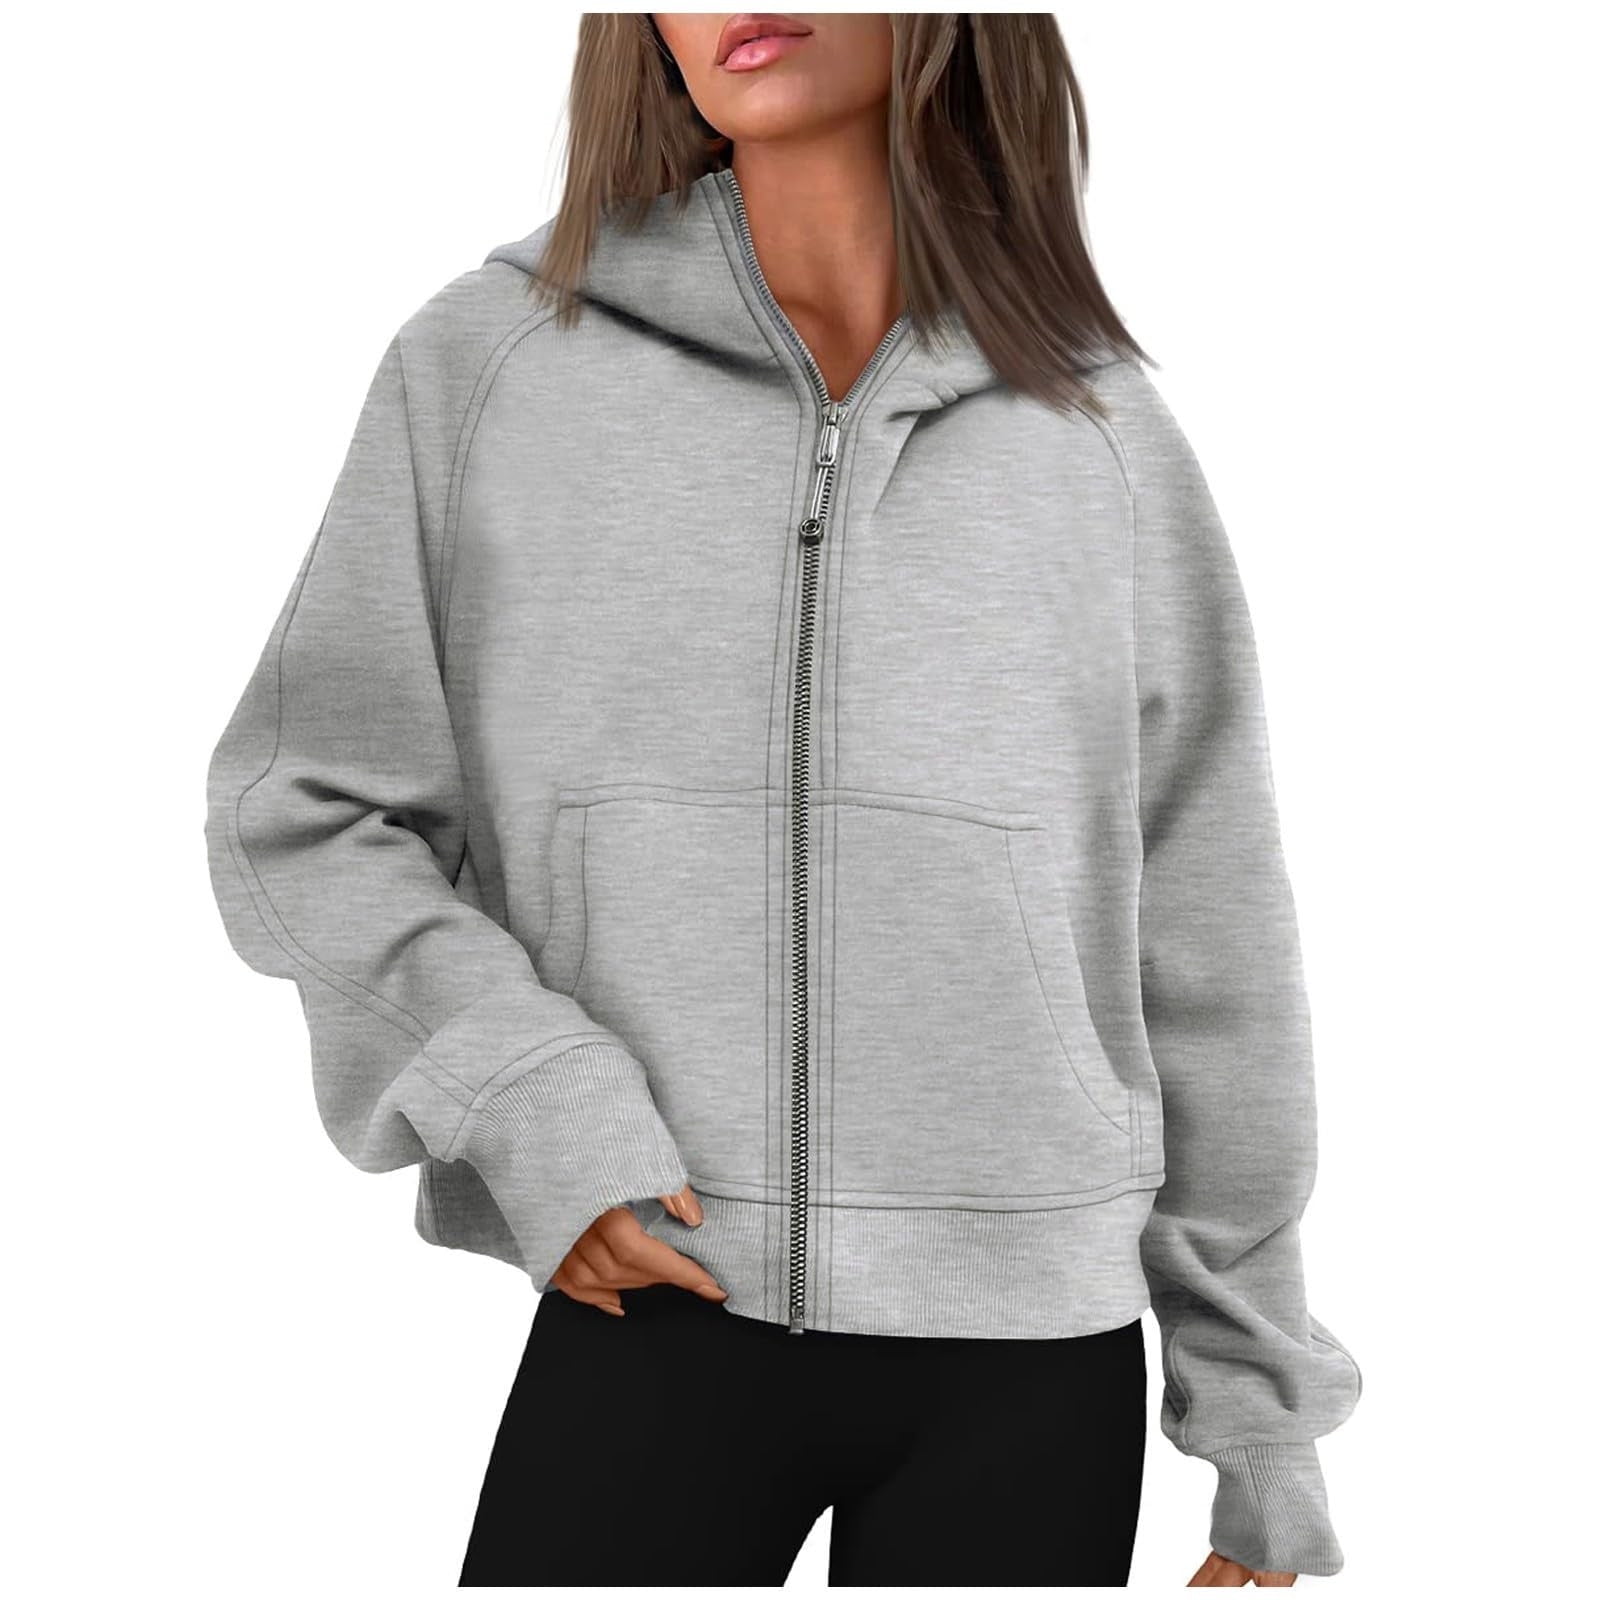 Kyodan outdoor pull over hoodie  Grey pullover hoodie, Clothes design,  Grey cropped hoodie